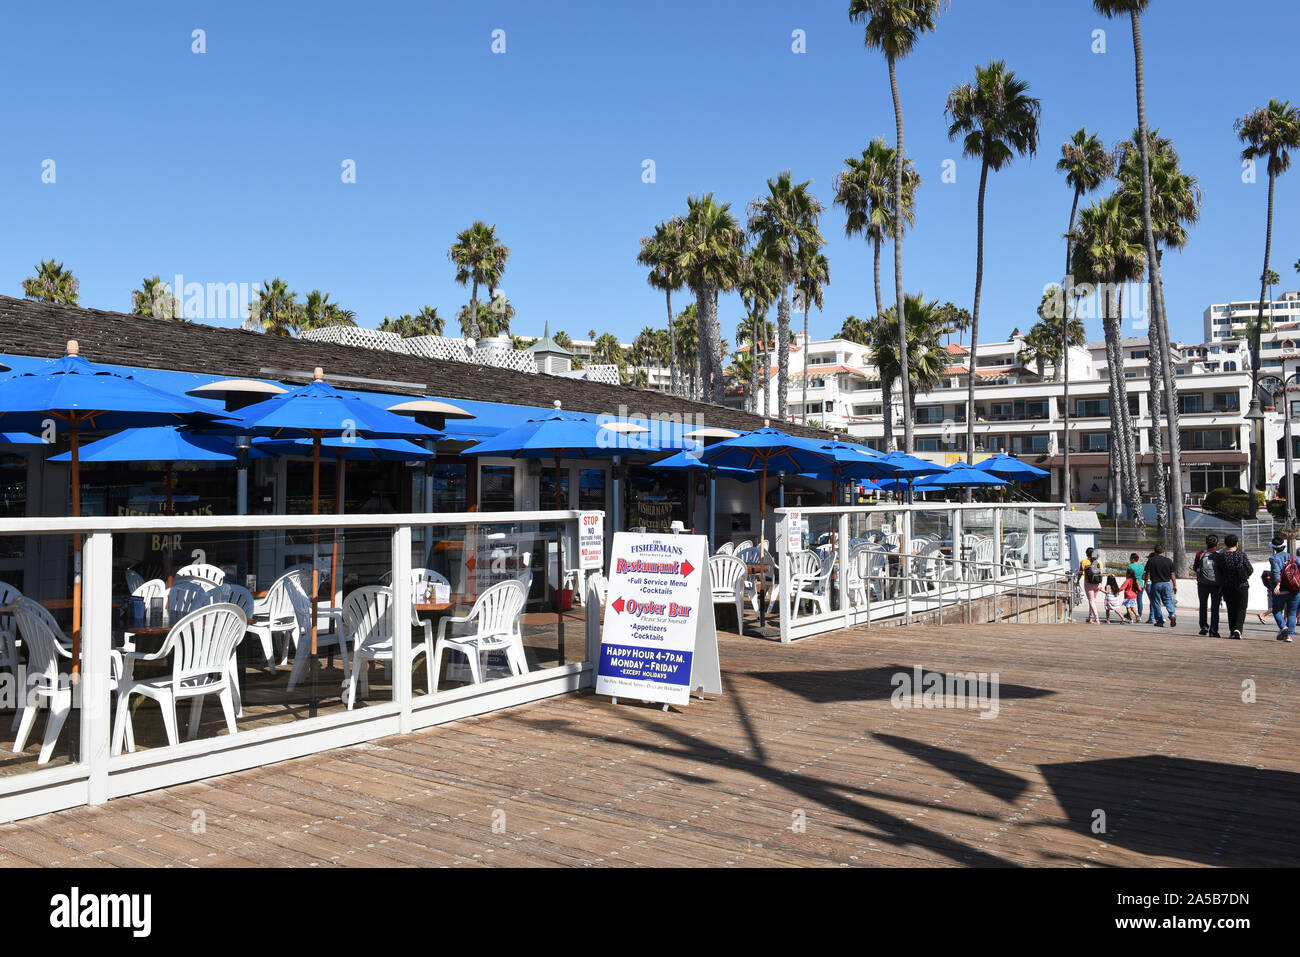 SAN CLEMENTE, CALIFORNIA - 18 OCT 2019: The Fishermans Restaurant and Bar on the pier in the south Orange County beach town. Stock Photo